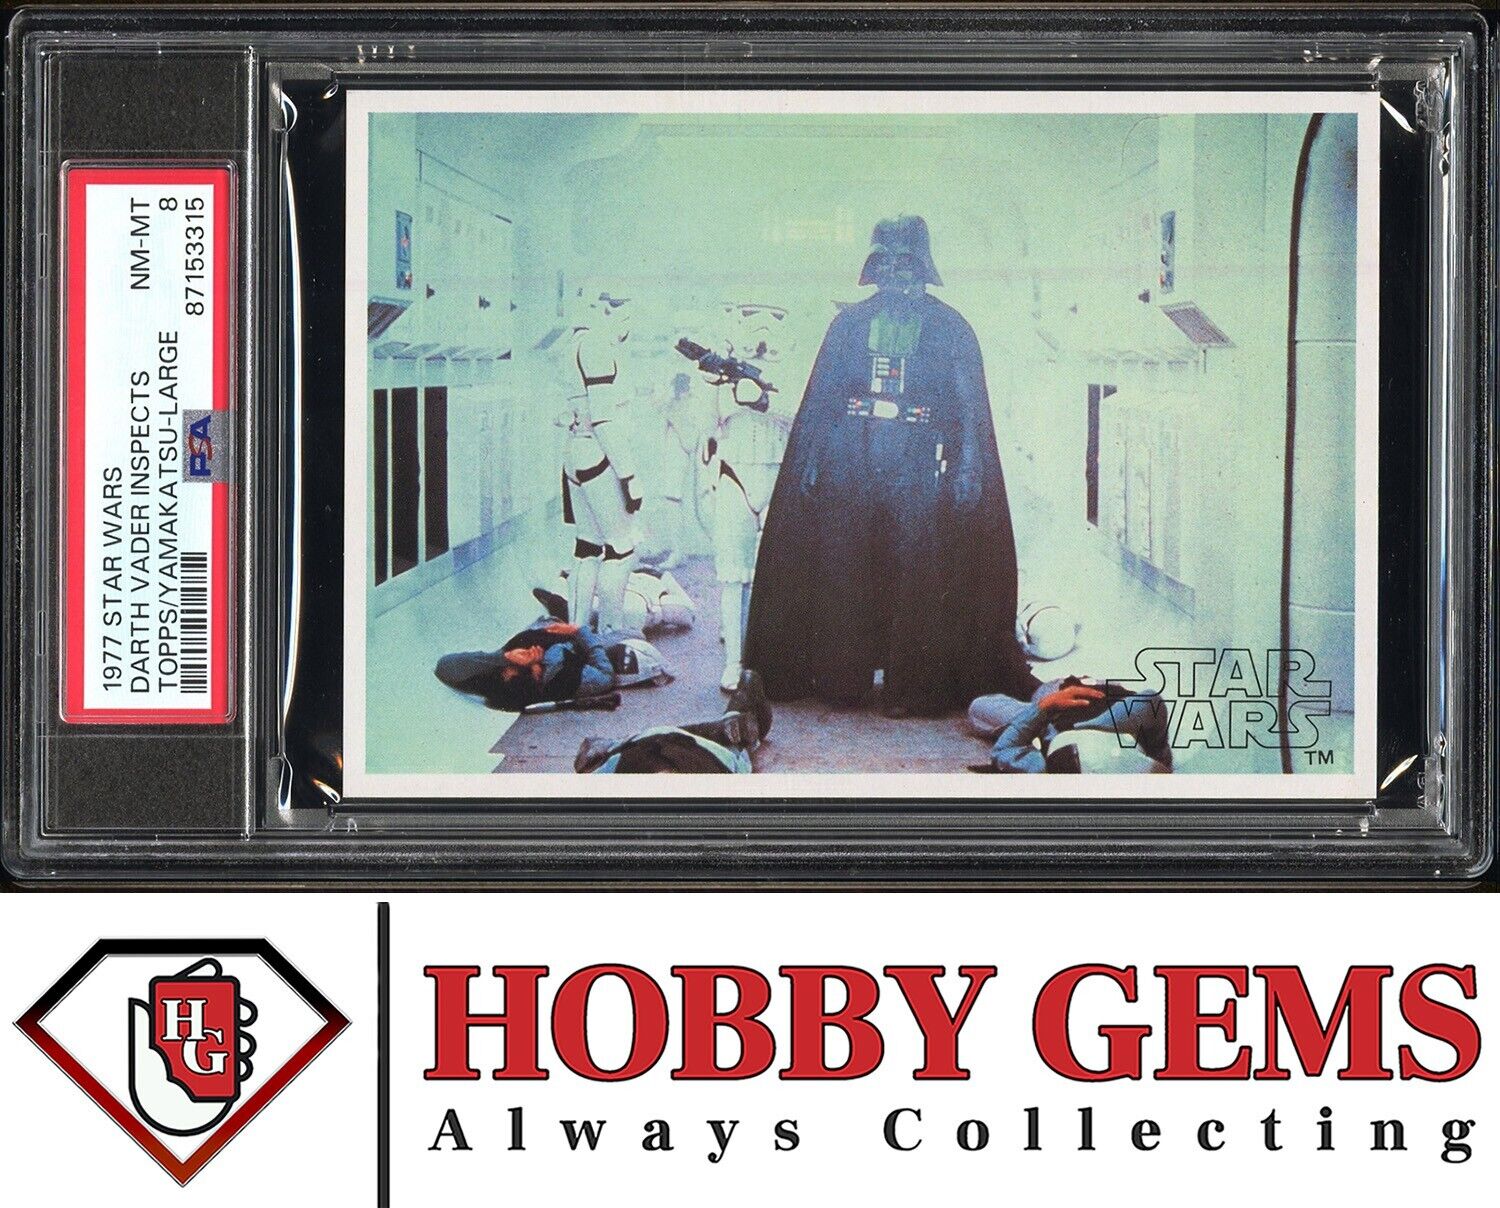 DARTH VADER PSA 8 1977 Topps Yamakatsu Star Wars Large Inspects the Throttled...